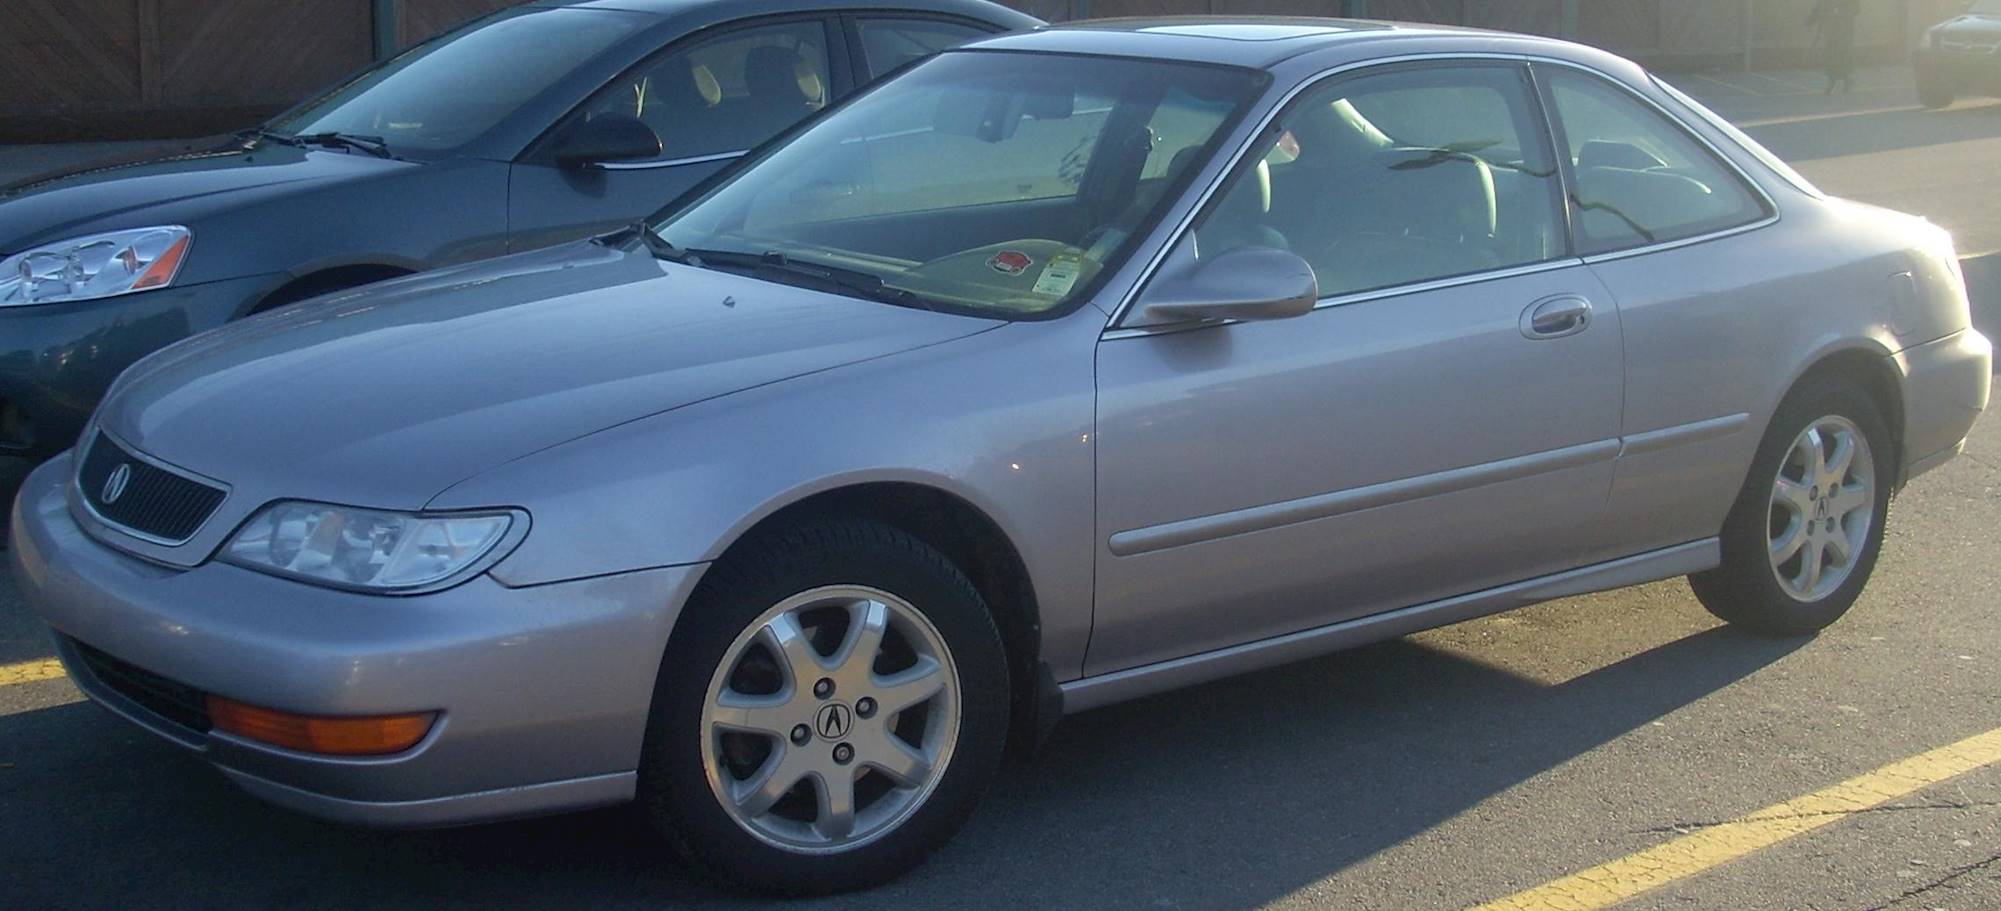 1998 Acura CL 2-Door Coupe 3.0L Base